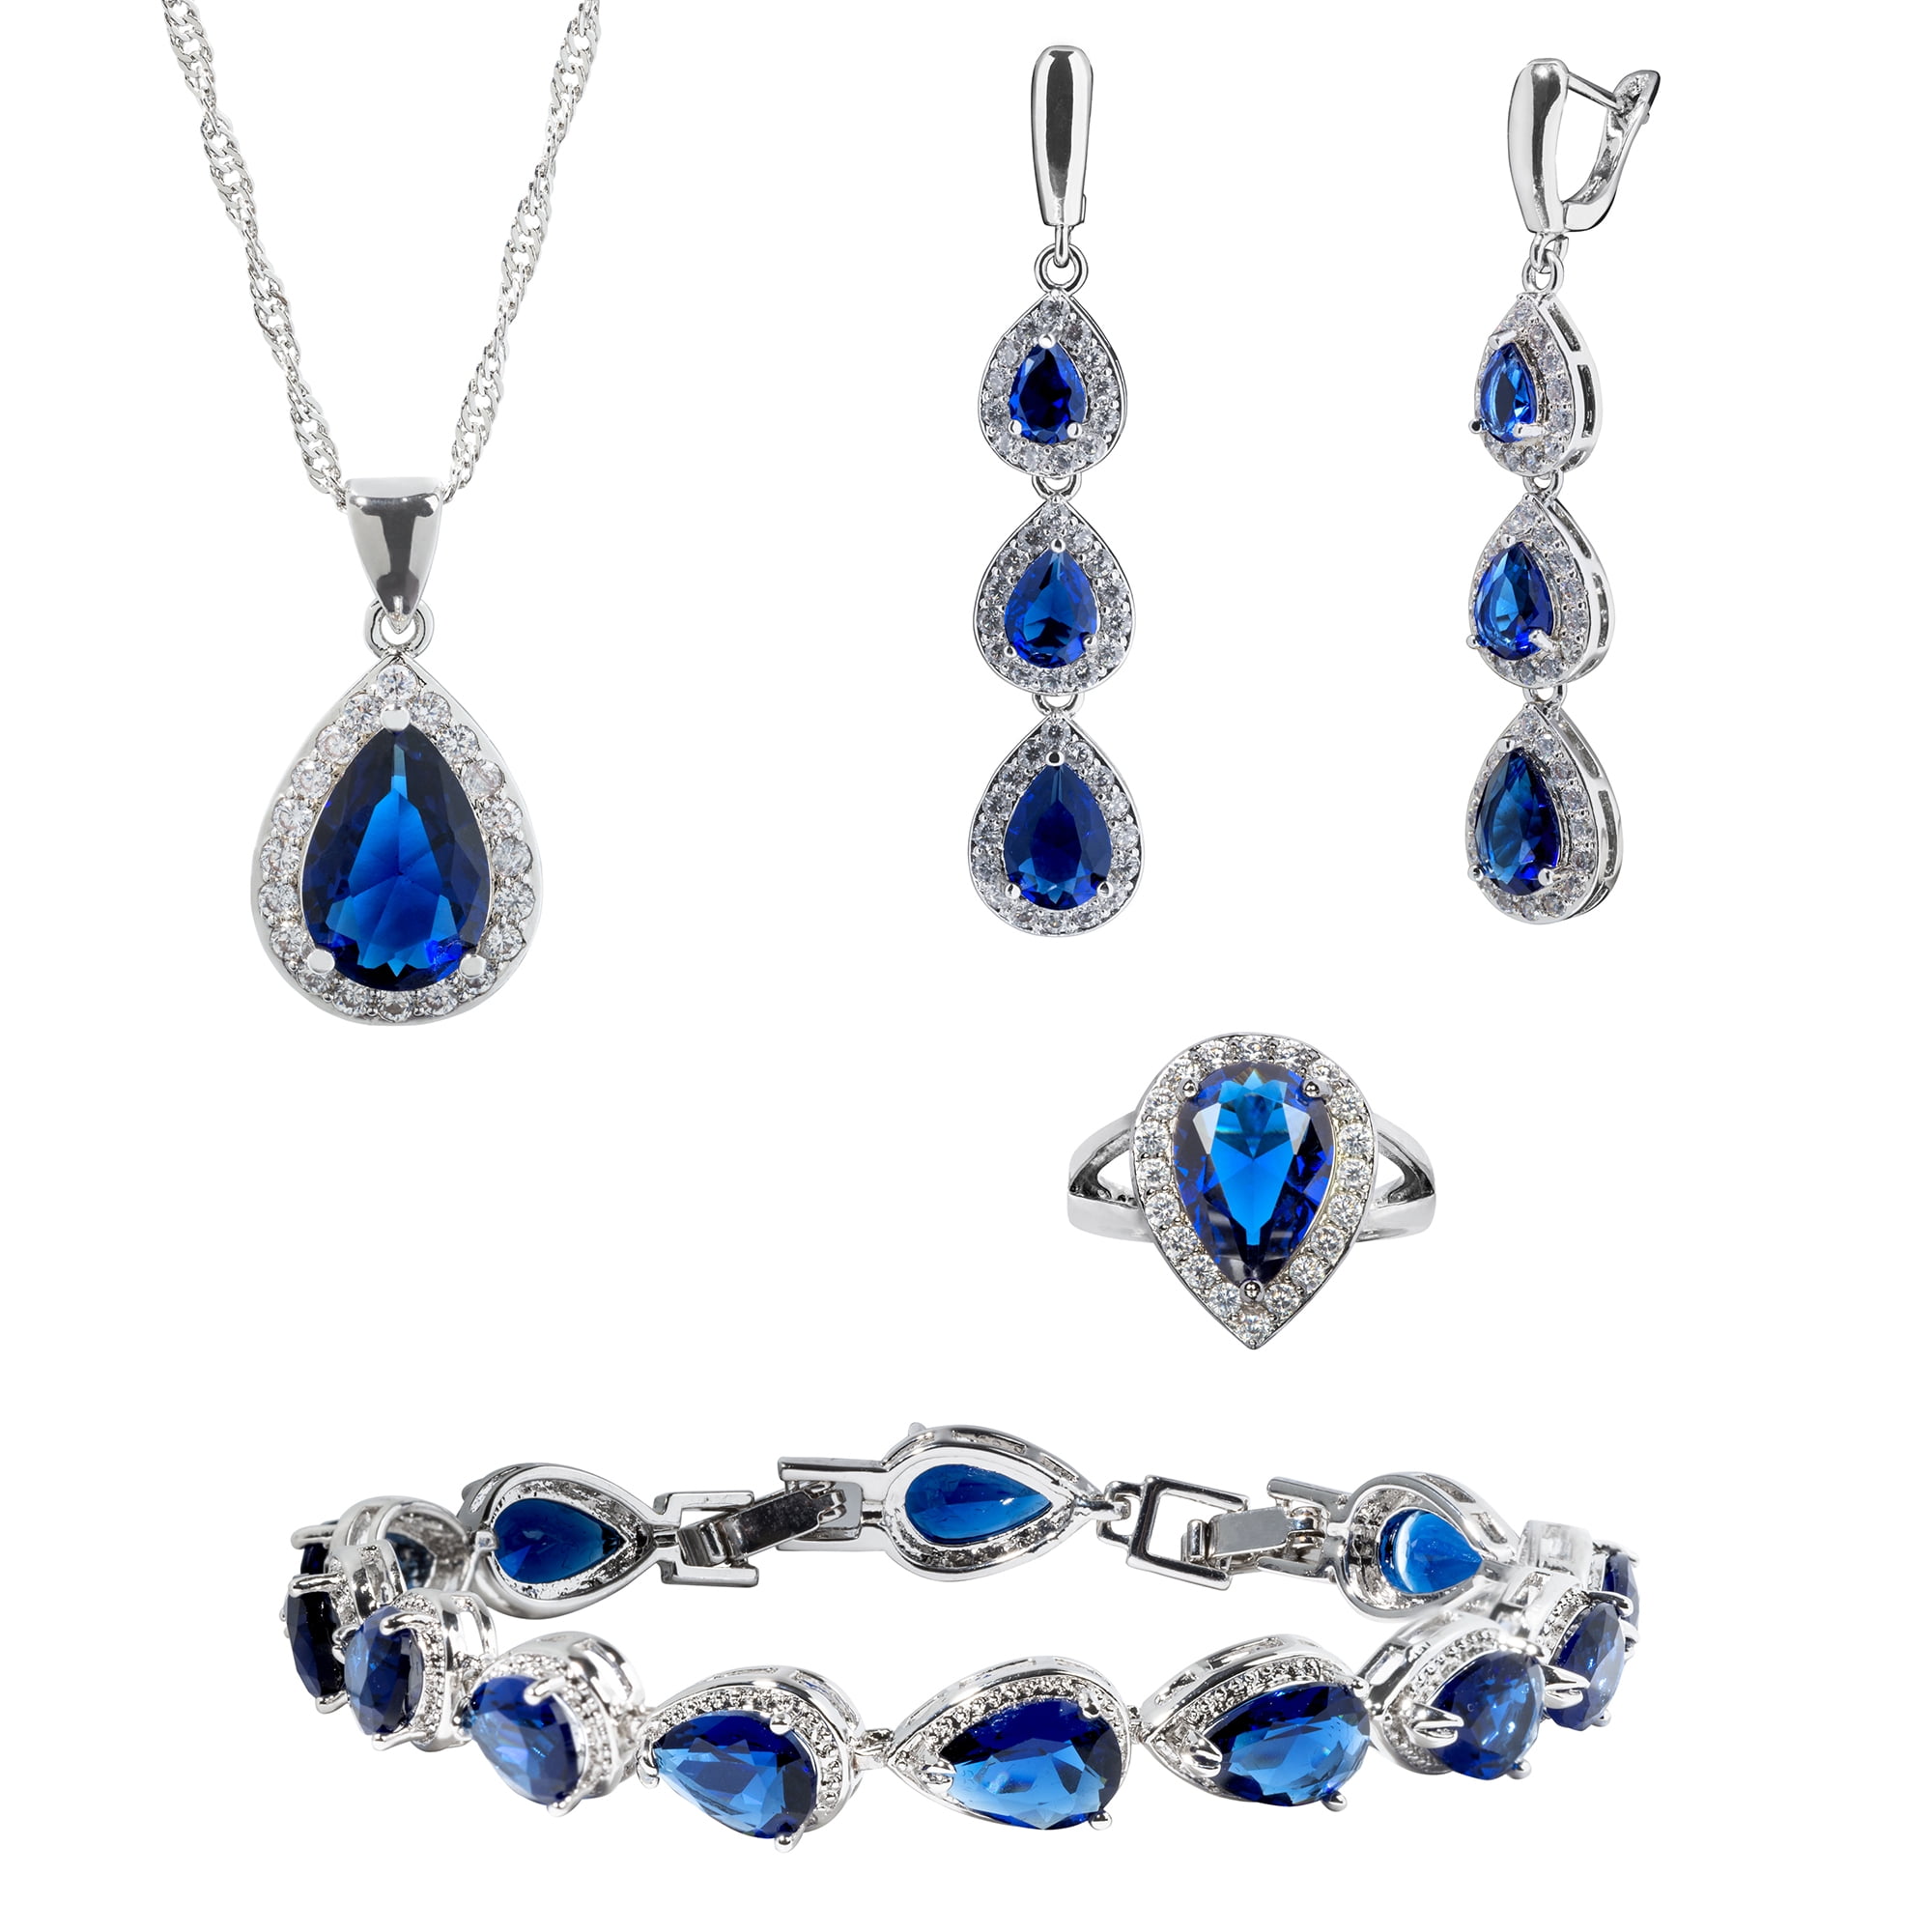 What Is the Sterling Silver Price of Different Jewelry Pieces?